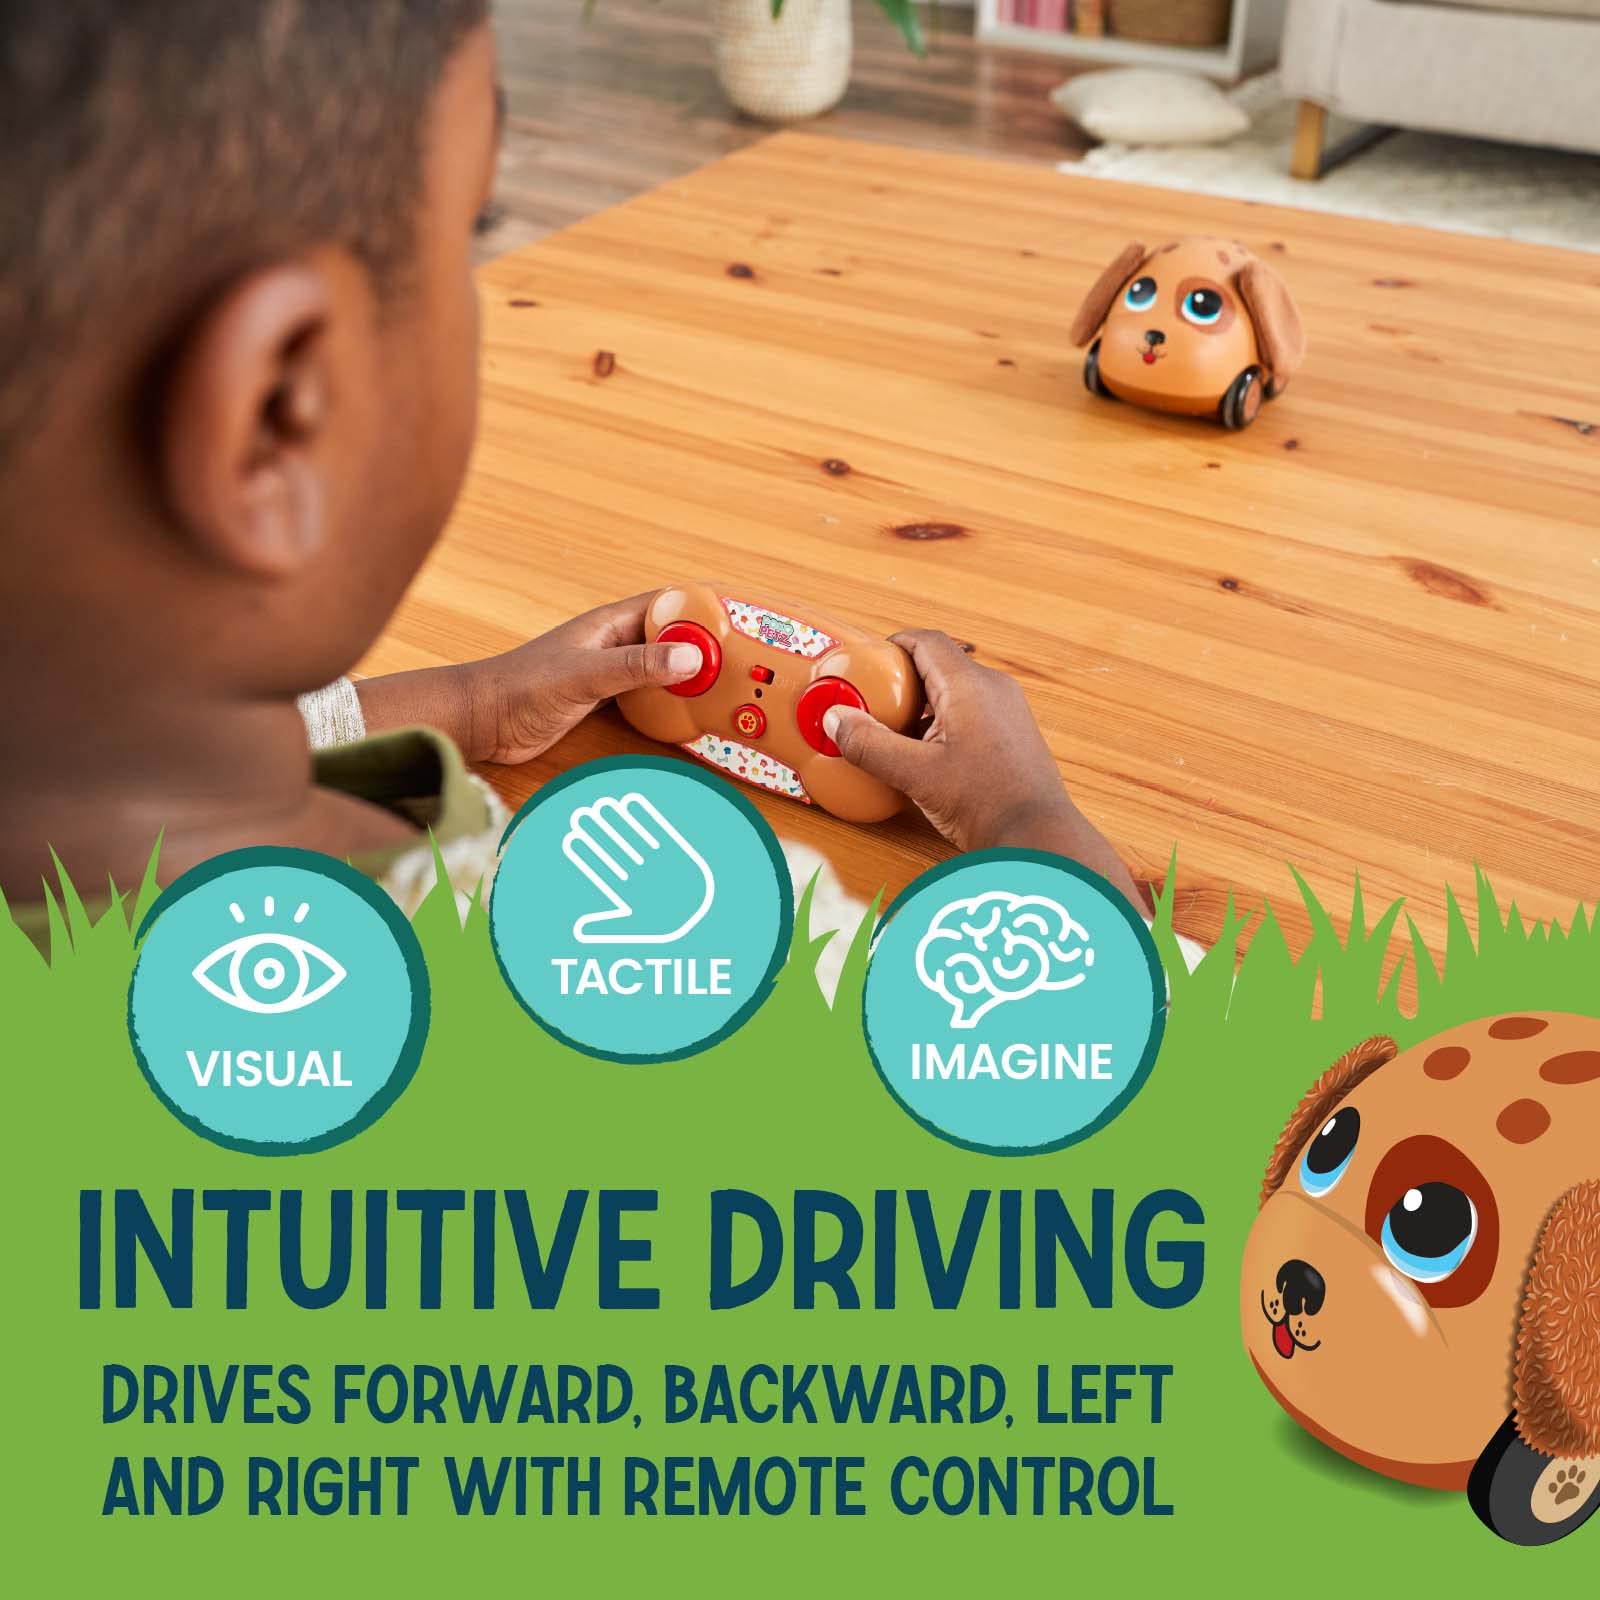 Poko Petz, Remote Control Car for Toddlers Dog Toys - 2.4GH for Boys and Girls, Light Up Toddler Toys, Singing, Talking Toys, Preschool Toys, Best Birthday, Toddler Gifts for Ages 3 and Up